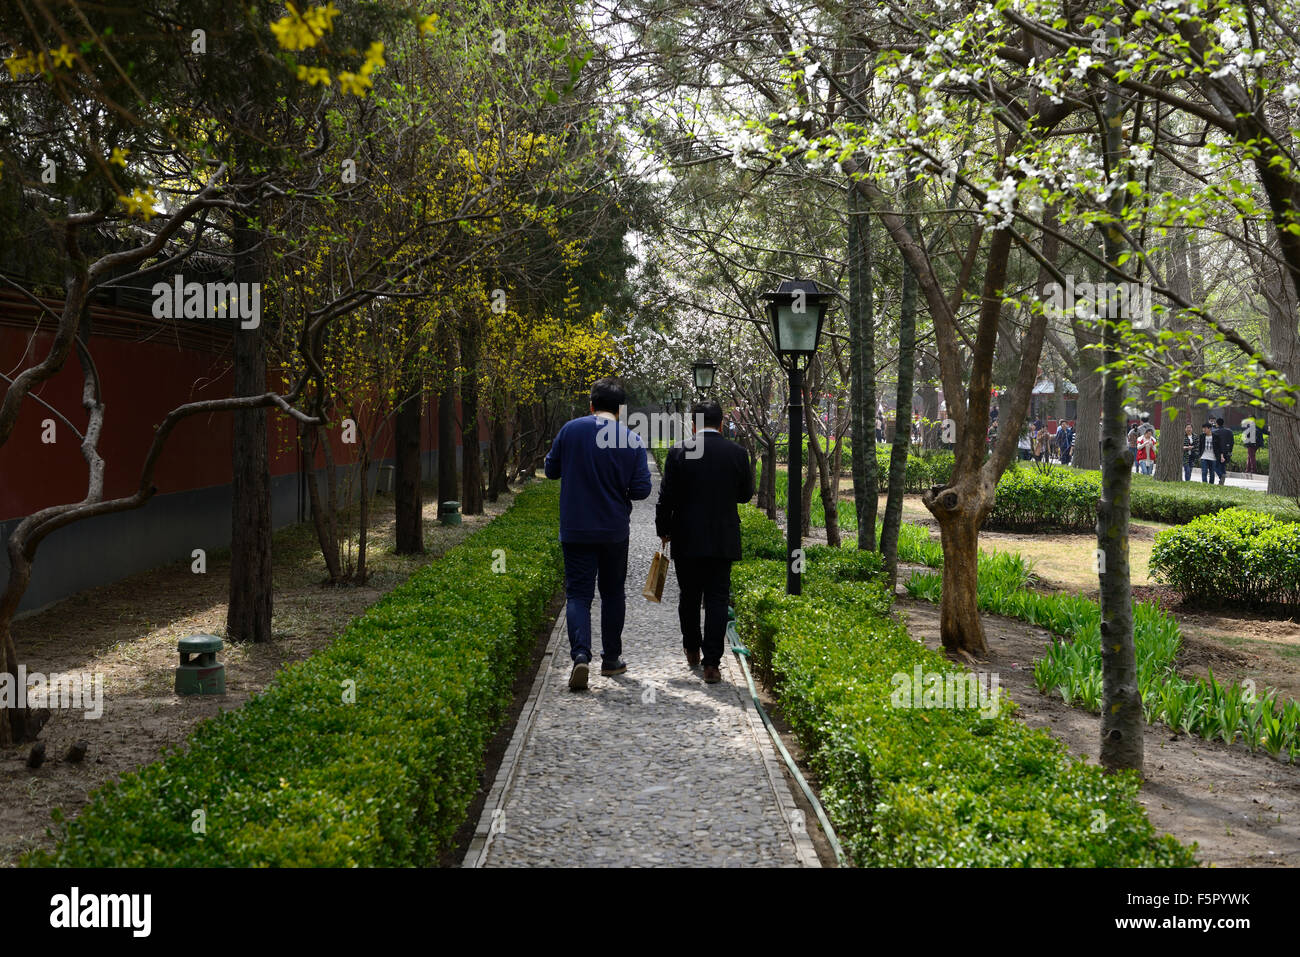 Tree lined pathway spring Cherry blossom Forsythia white yellow flowers flower blossom bloom Yonghe Lamasery Beijing RM Floral Stock Photo